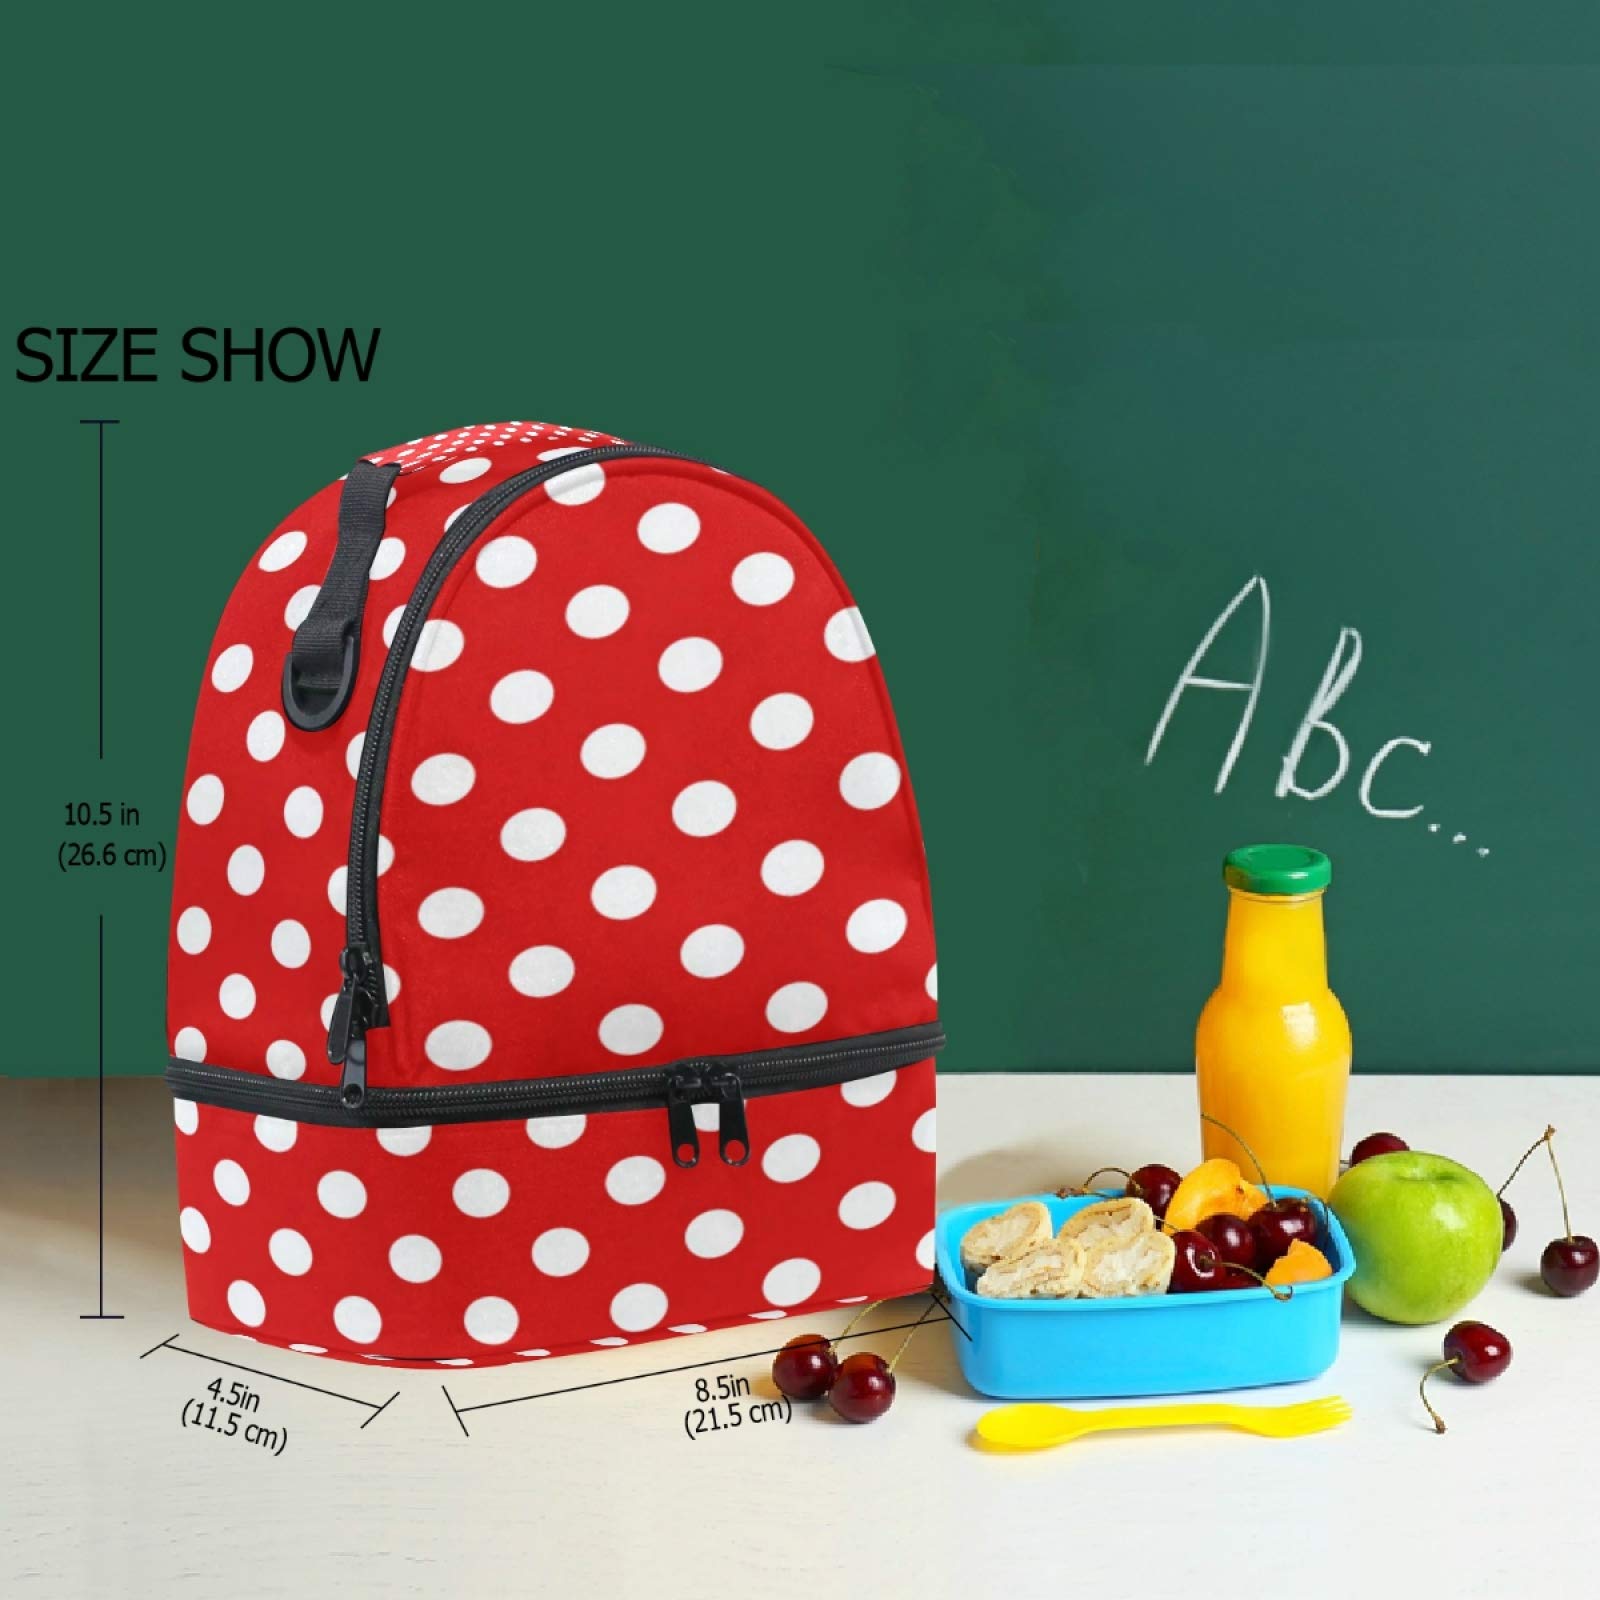 Naanle Red White Polka Dot Double Decker Insulated Lunch Box Bag Waterproof Leakproof Cooler Thermal Tote Bag Large for Men Women